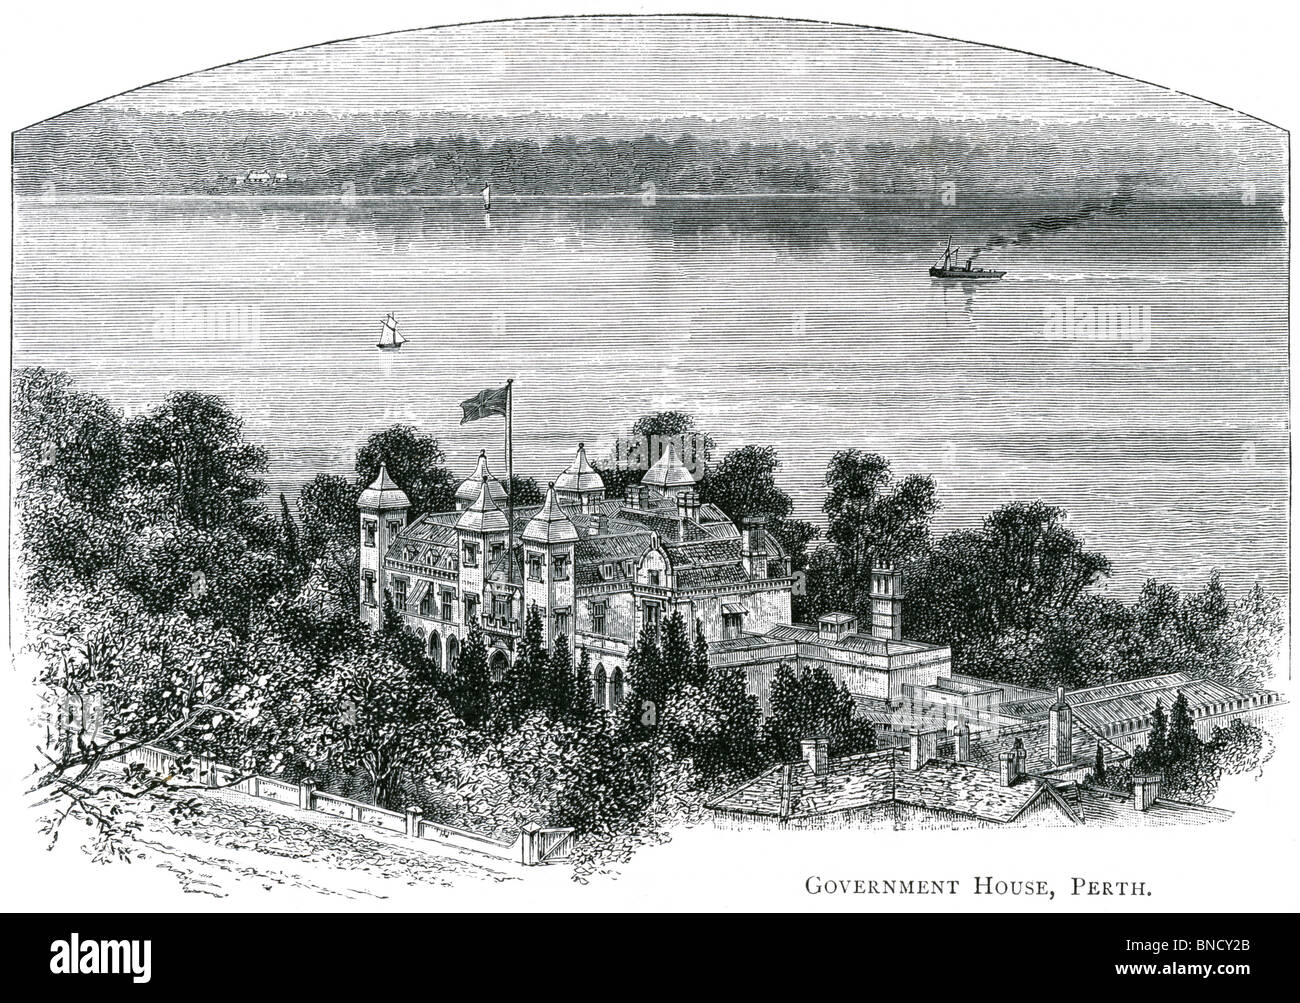 An engraving of Government House, Perth, Western Australia - published in a book printed in 1886. Stock Photo